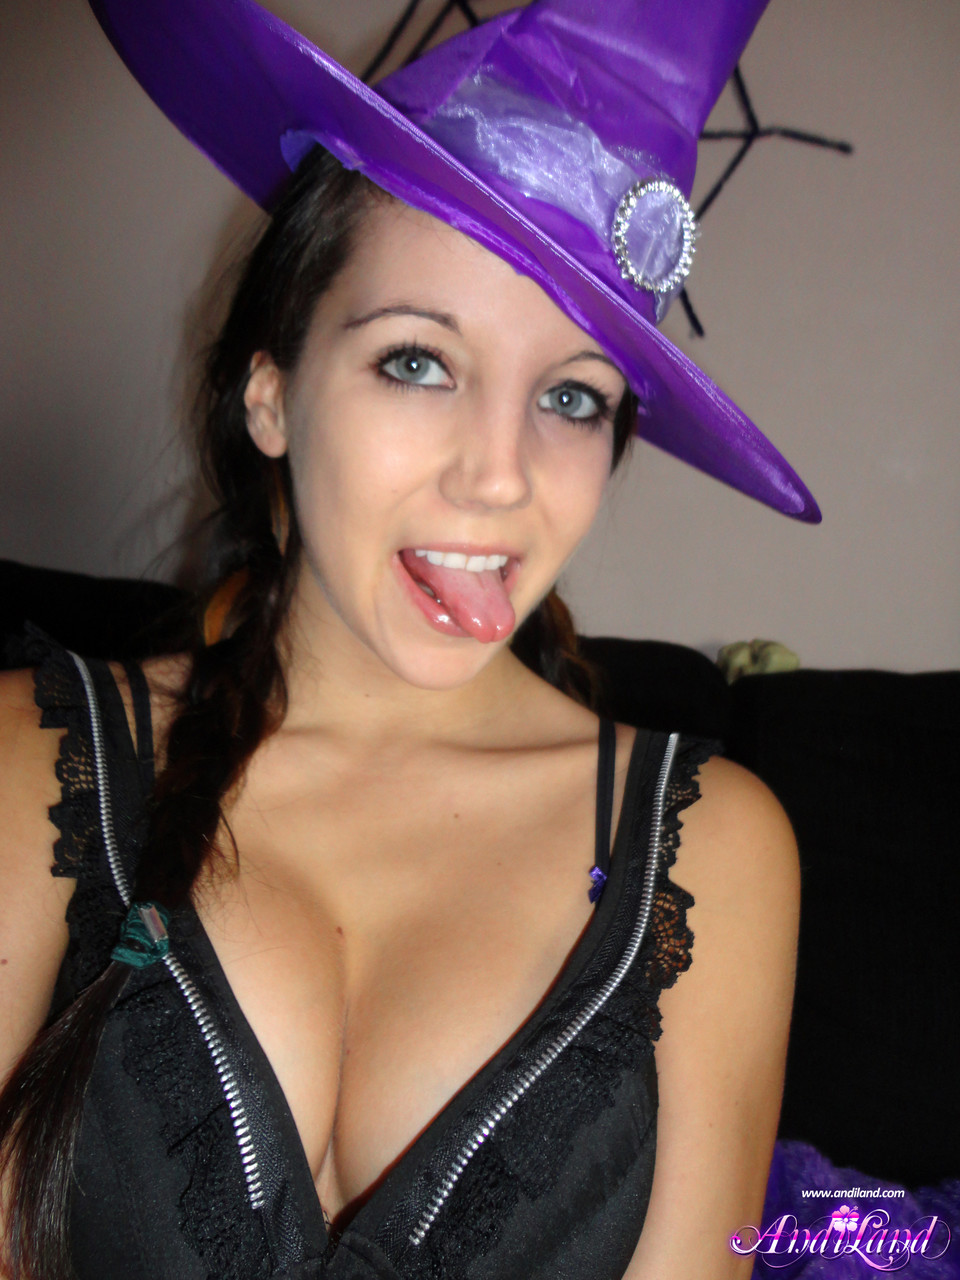 Teen amateur Andi Land teases during upskirt action in a Halloween outfit porno foto #428432669 | Andi Land Pics, Andi Land, Cosplay, mobiele porno